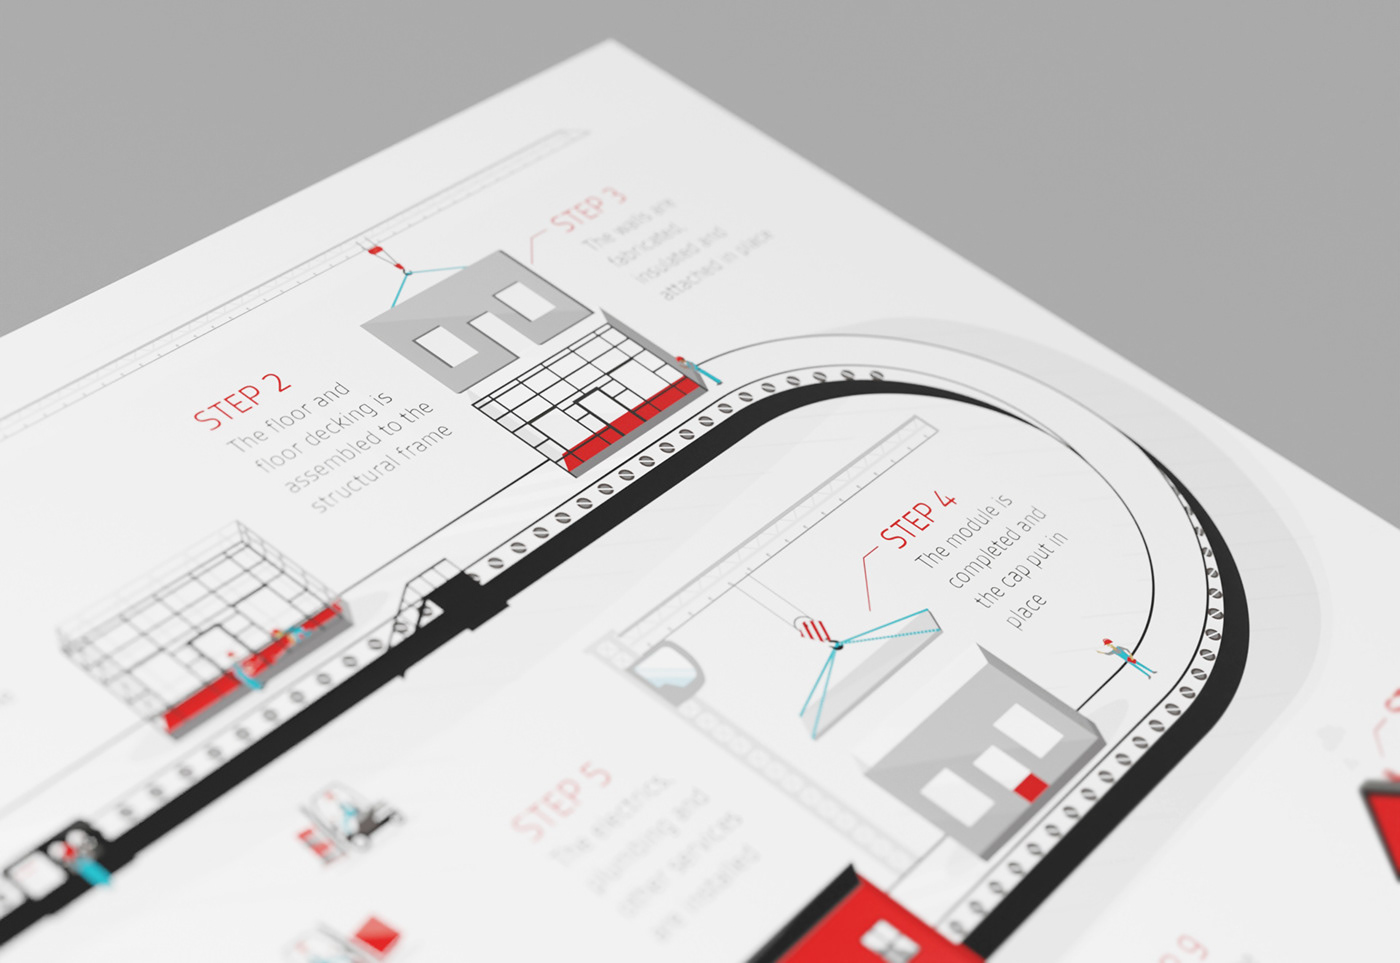 BSI data visualization infographic infographics offsite construction construction company modular Annual Report Design Building infographic Presentation Infographic